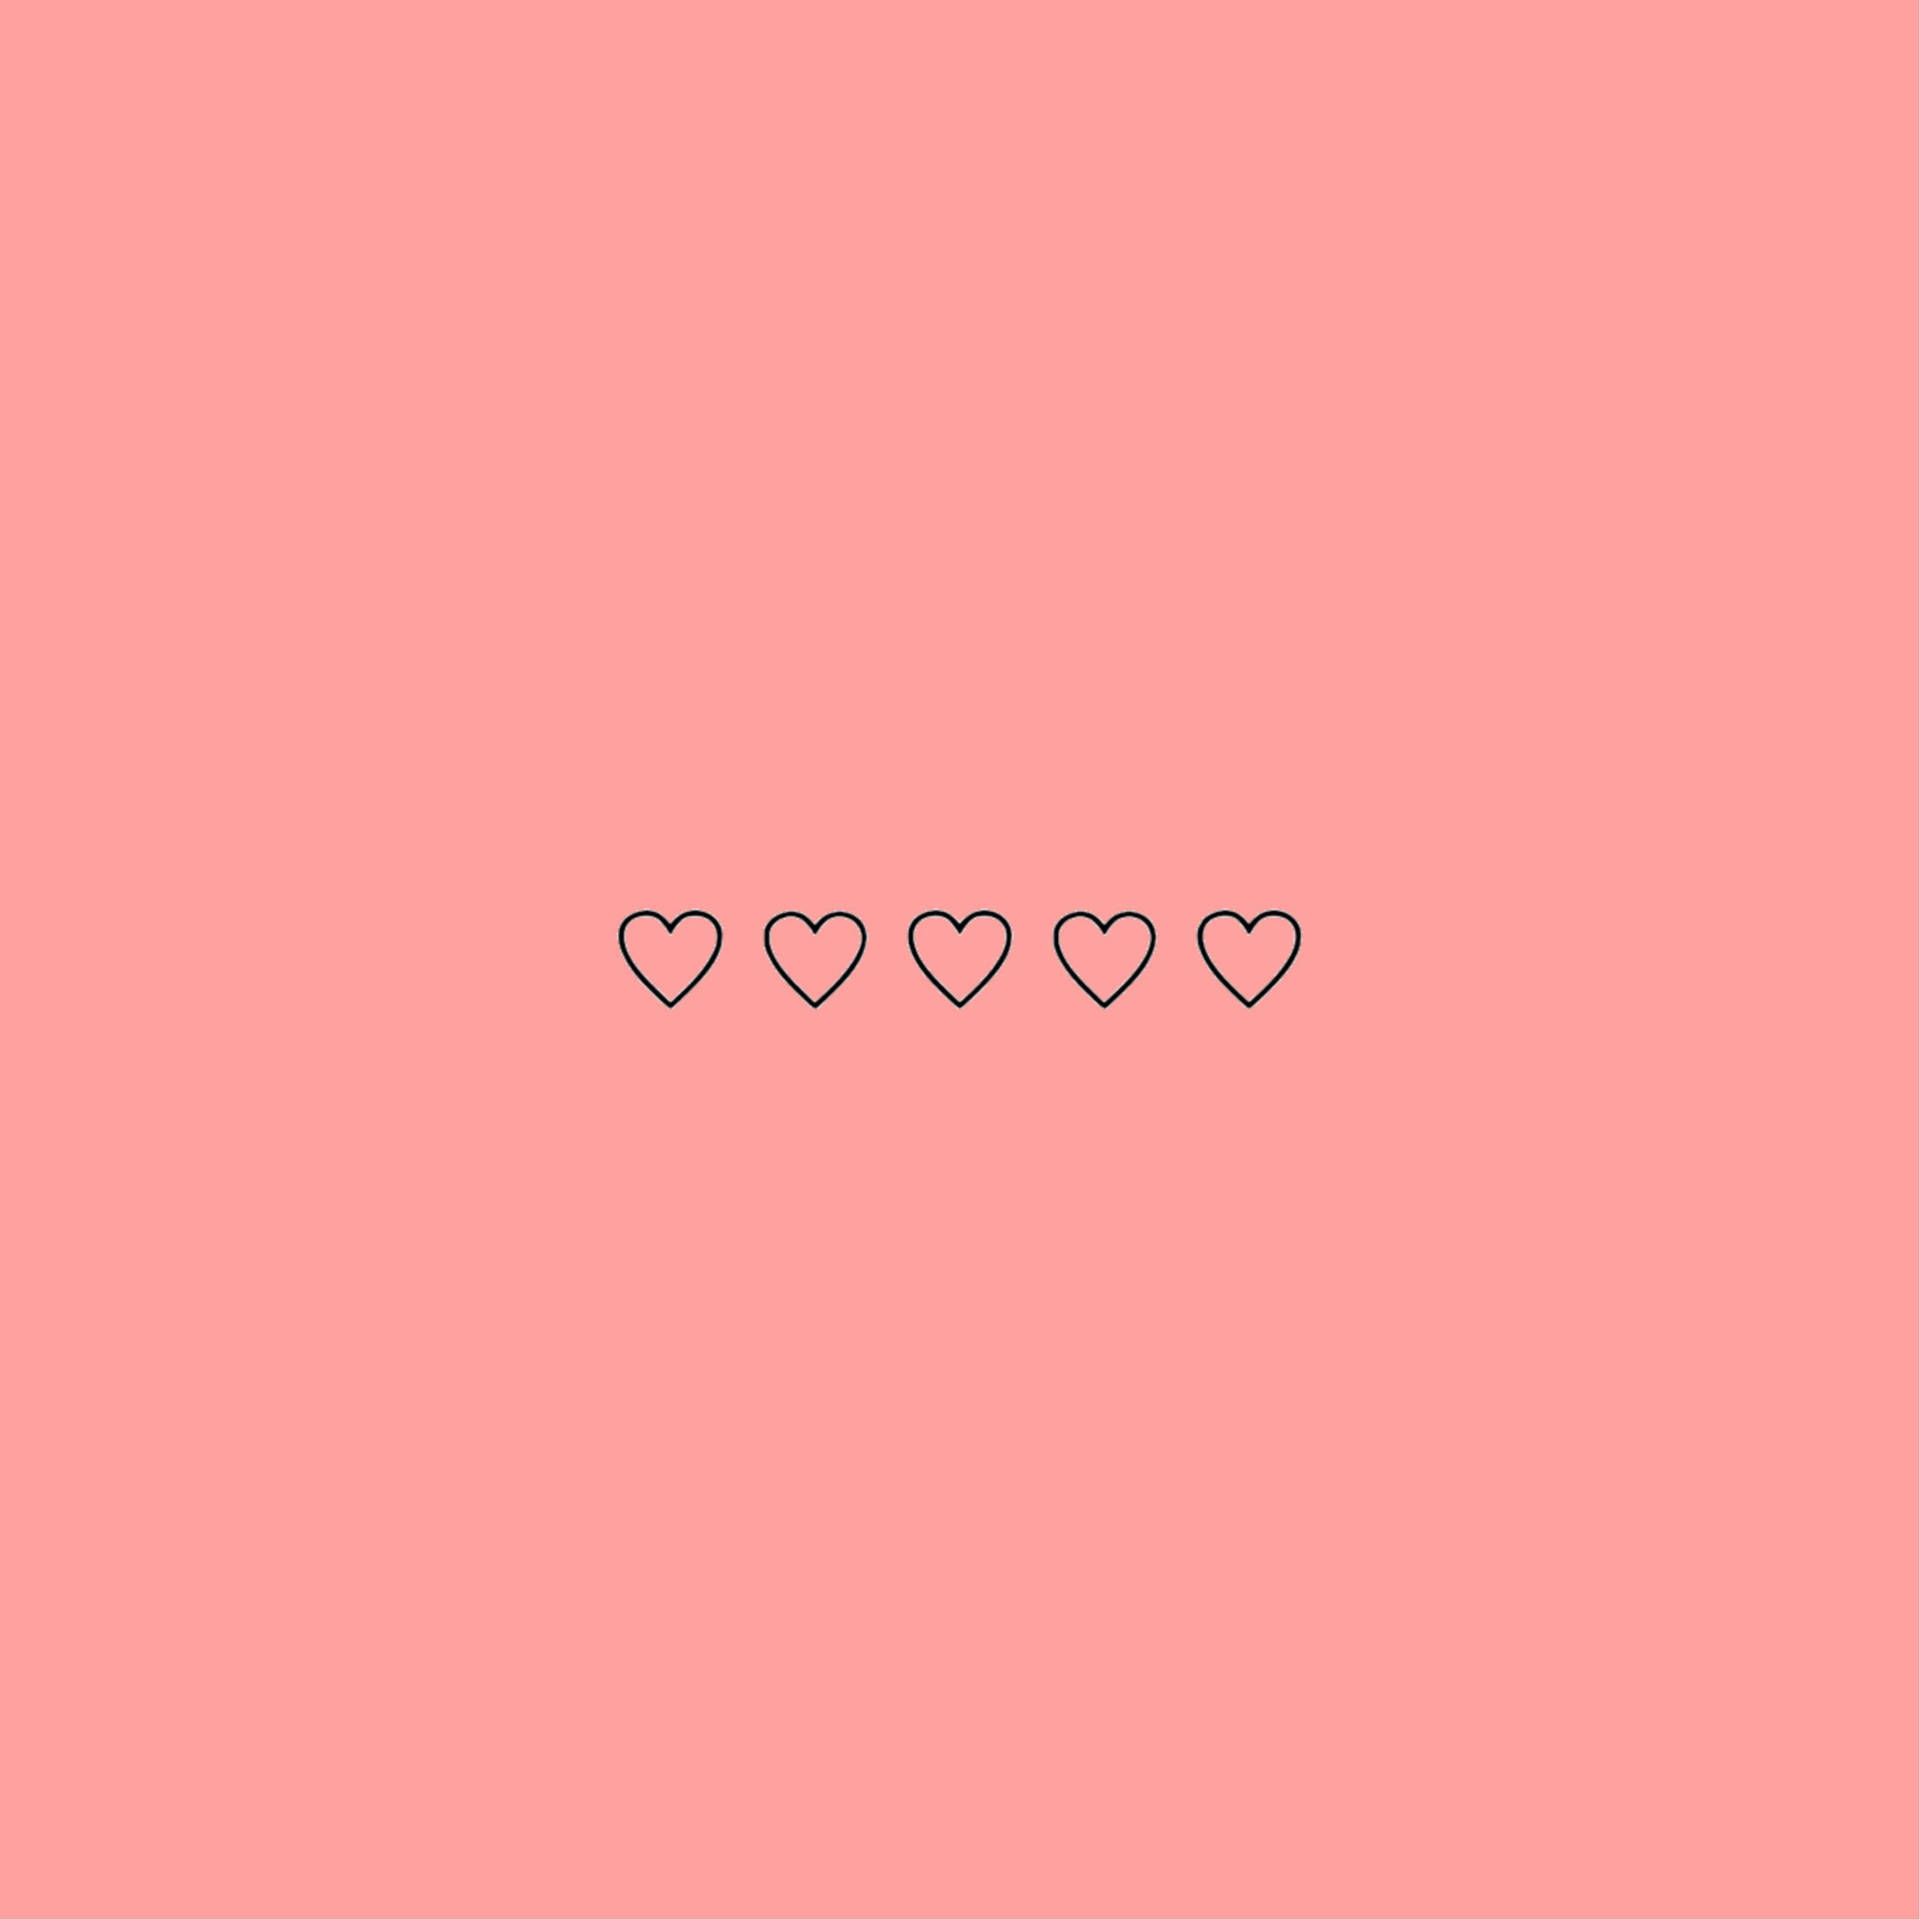 Aesthetic Peach Pink Five Hearts Wallpaper